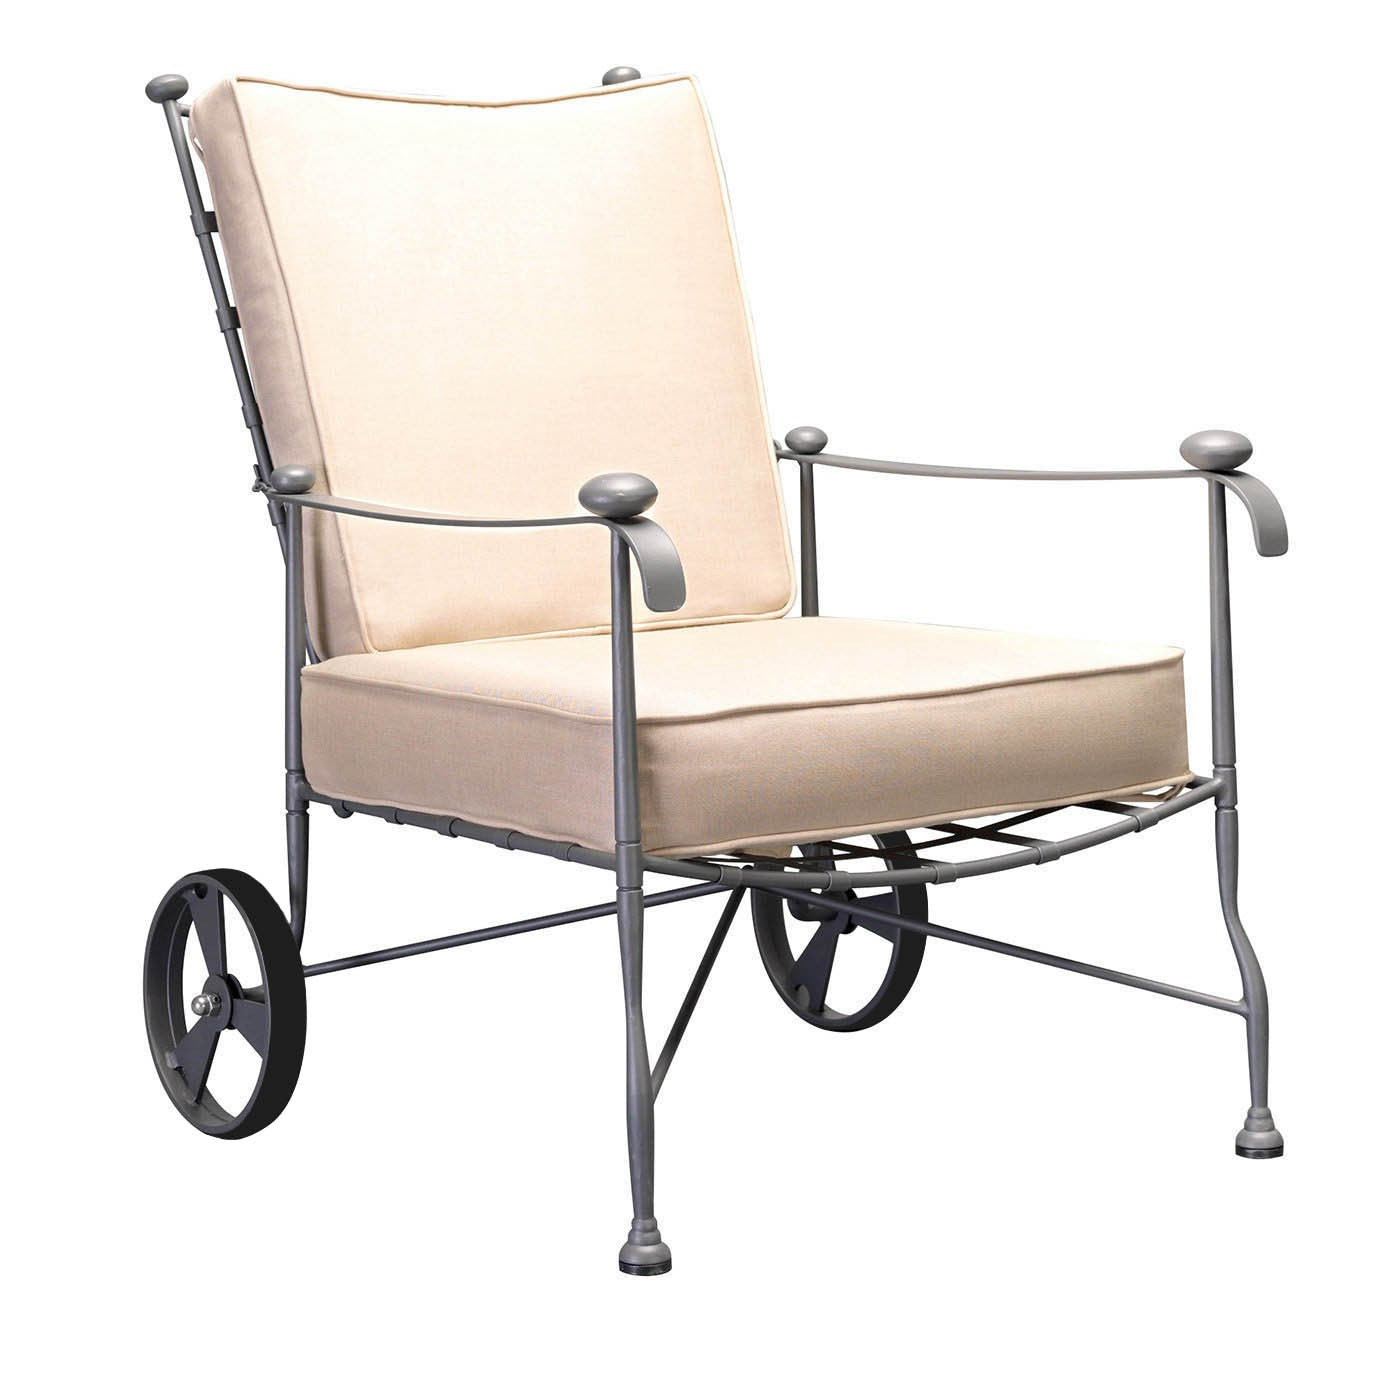 Intreccio Lounge Armchair in Stainless Steel - Main view